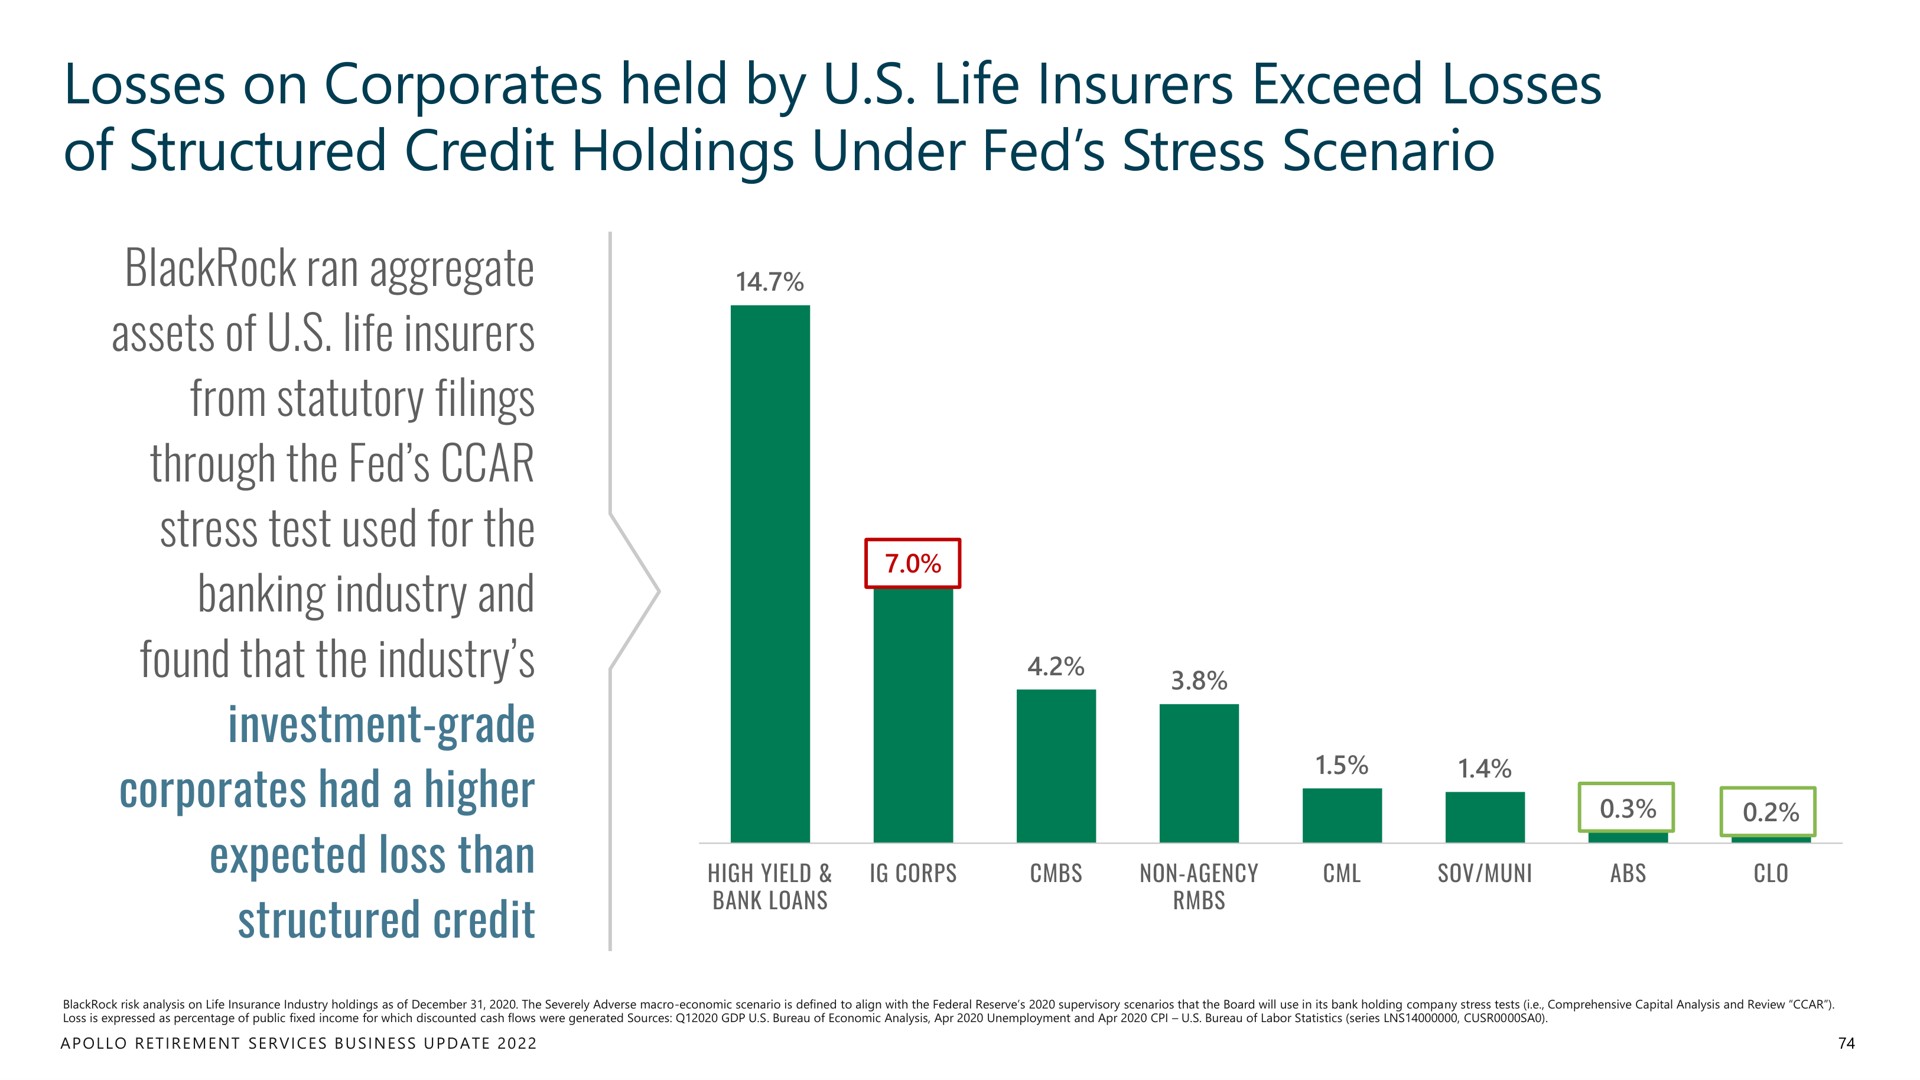 losses on held by life insurers exceed losses of structured credit holdings under fed stress scenario | Apollo Global Management